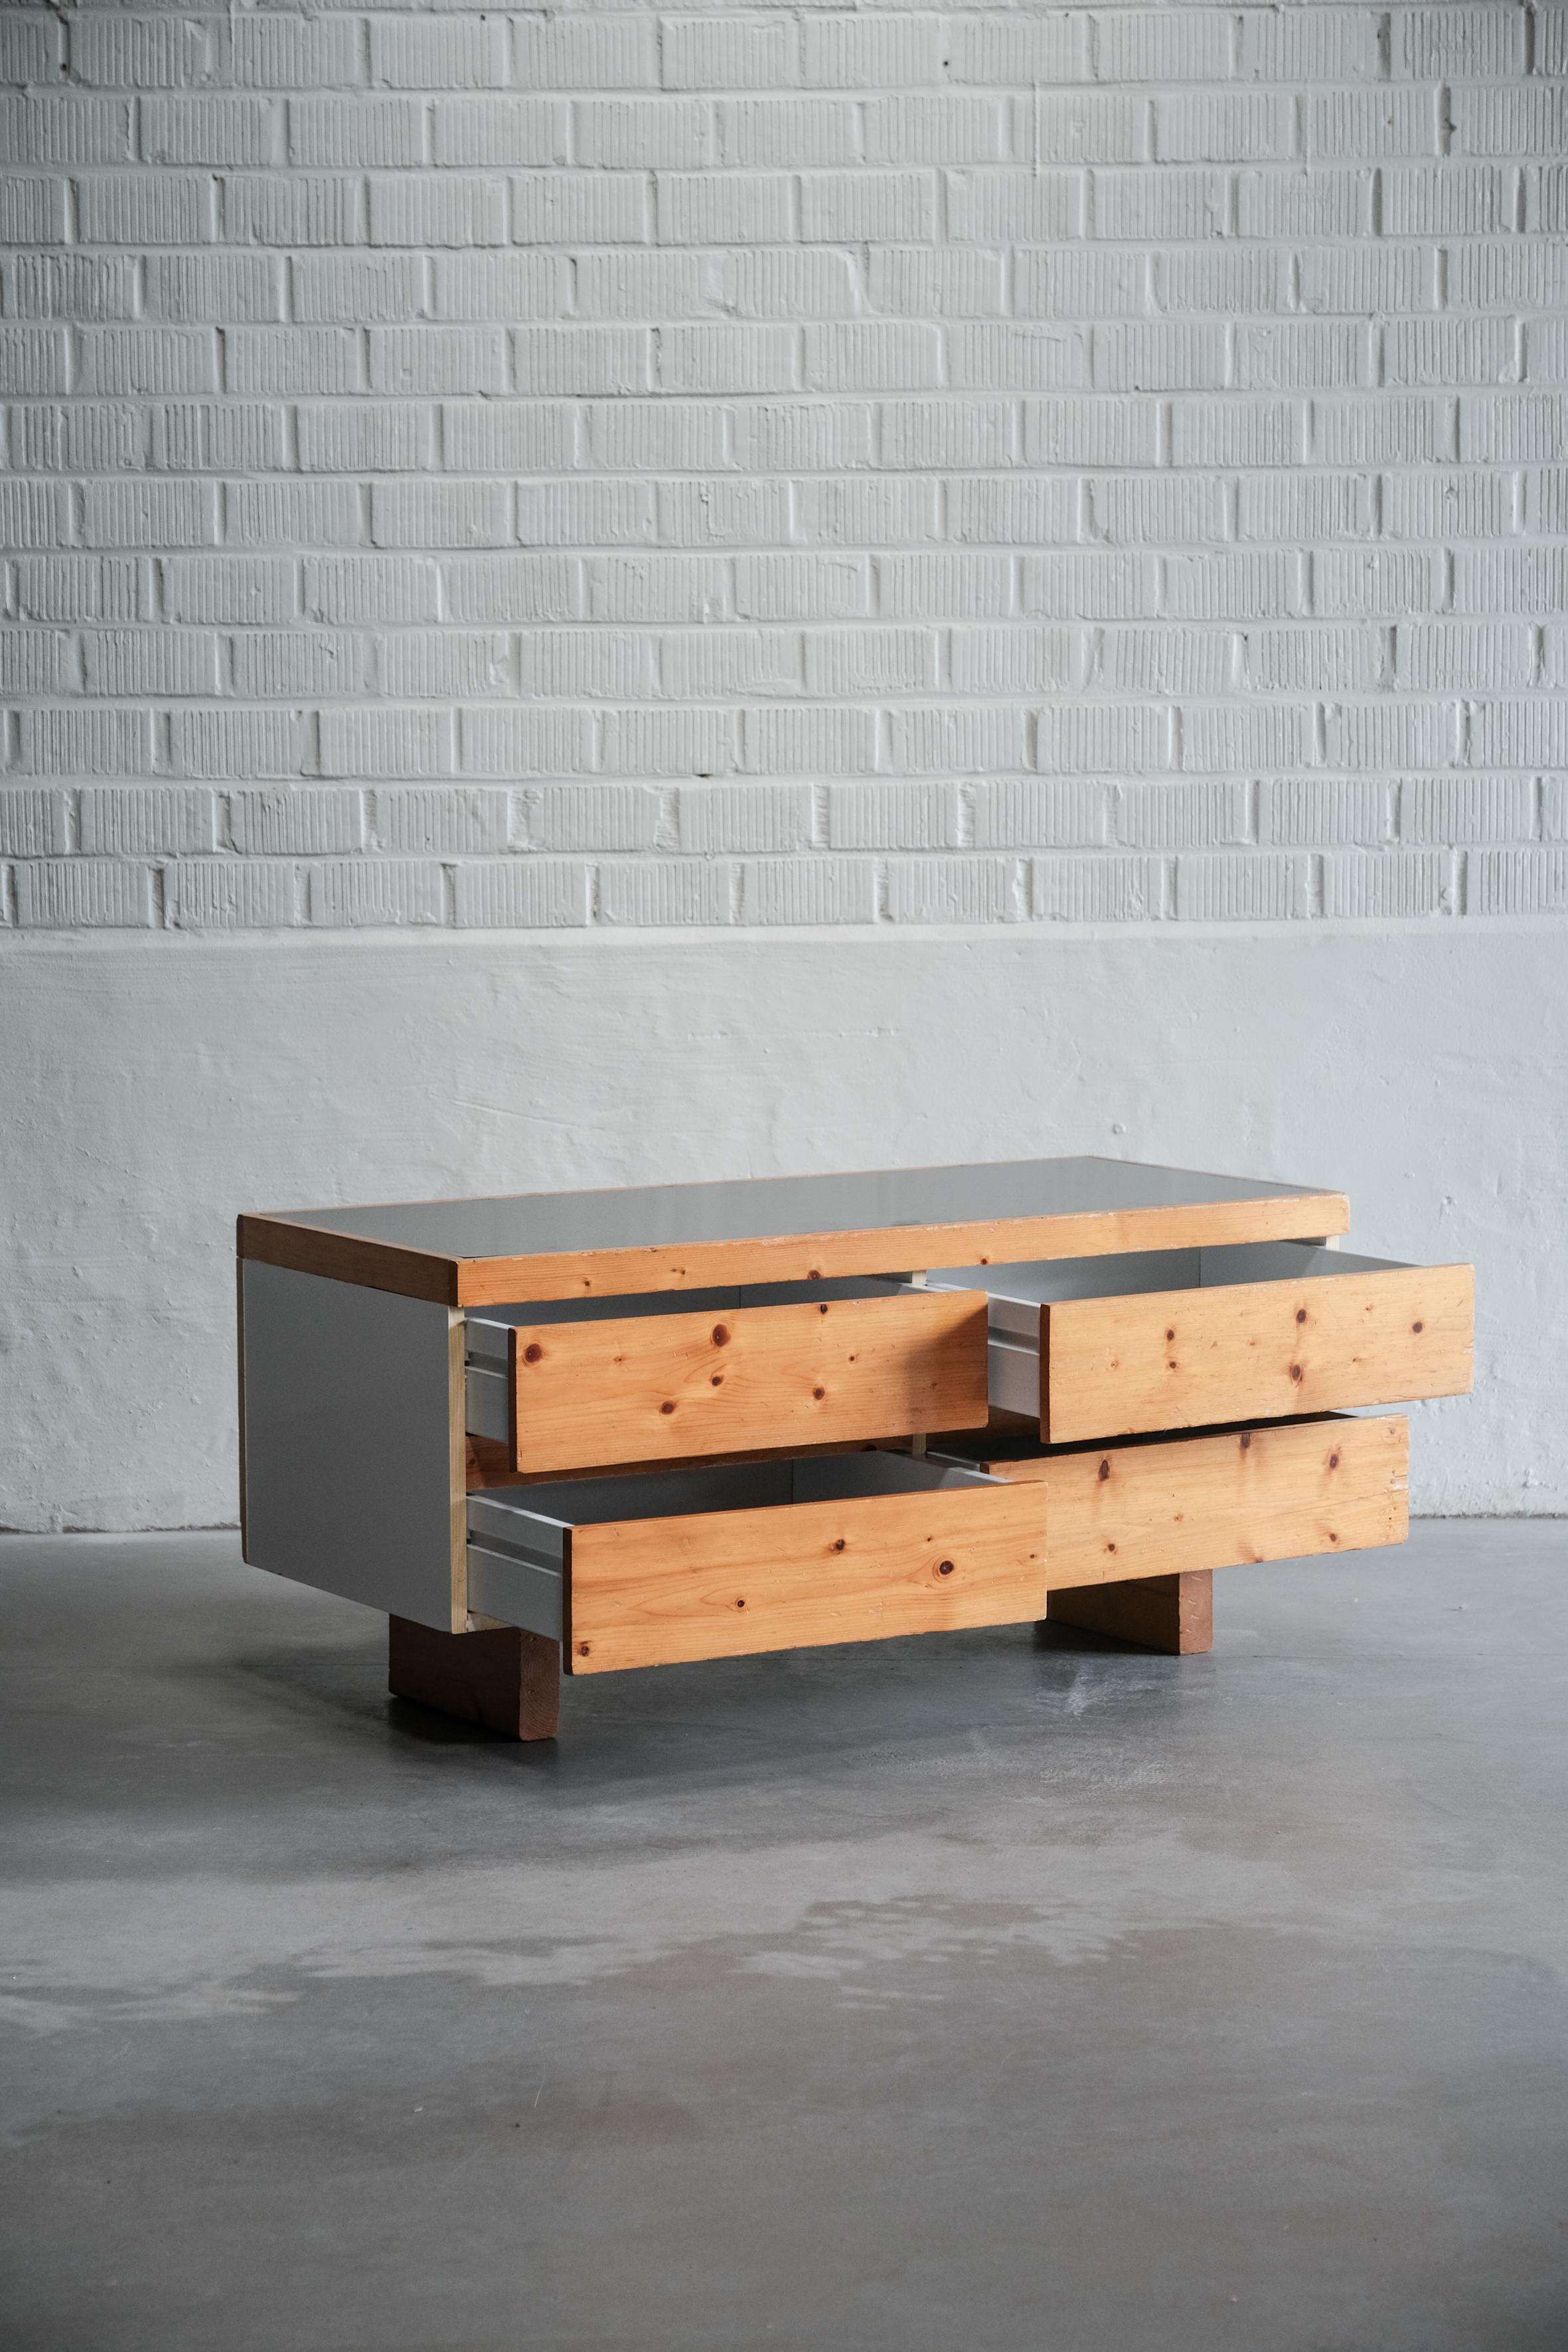 Rare Vintage chest of drawers by Charlotte Perriand, as Used in the Iconic Les Arcs Ski-Resort. 

This remarkable vintage cabinet, crafted by the legendary Charlotte Perriand and once gracing the renowned Les Arcs ski-resort. As a pioneering figure